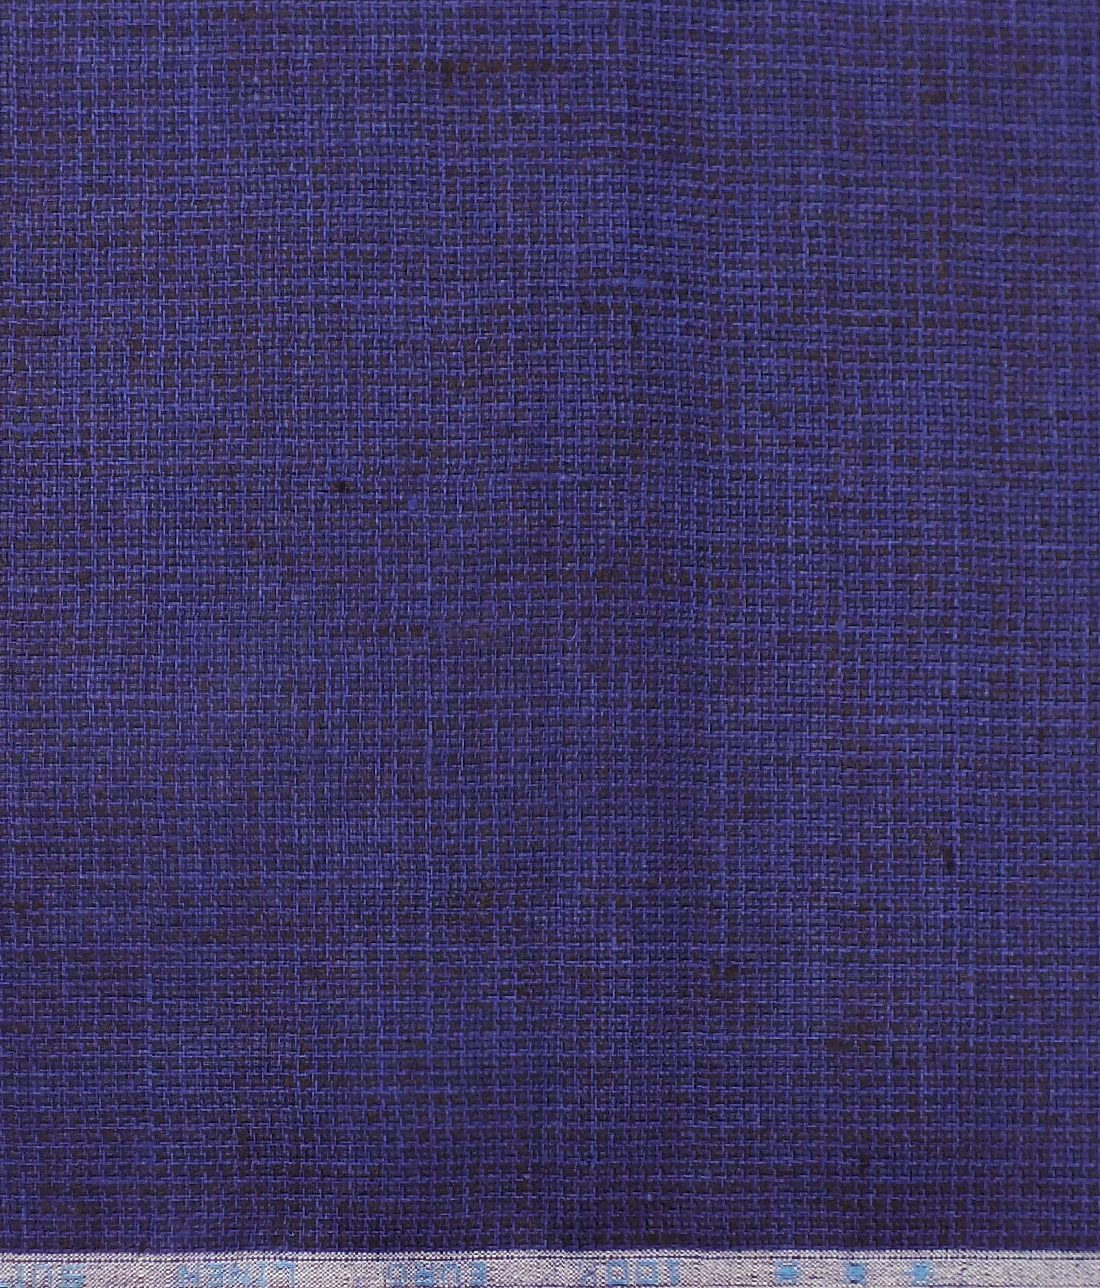 Solino Dark Bright Royal Blue 100% Euro Linen Houndstooth Weave Trouser Fabric (1.30 M)